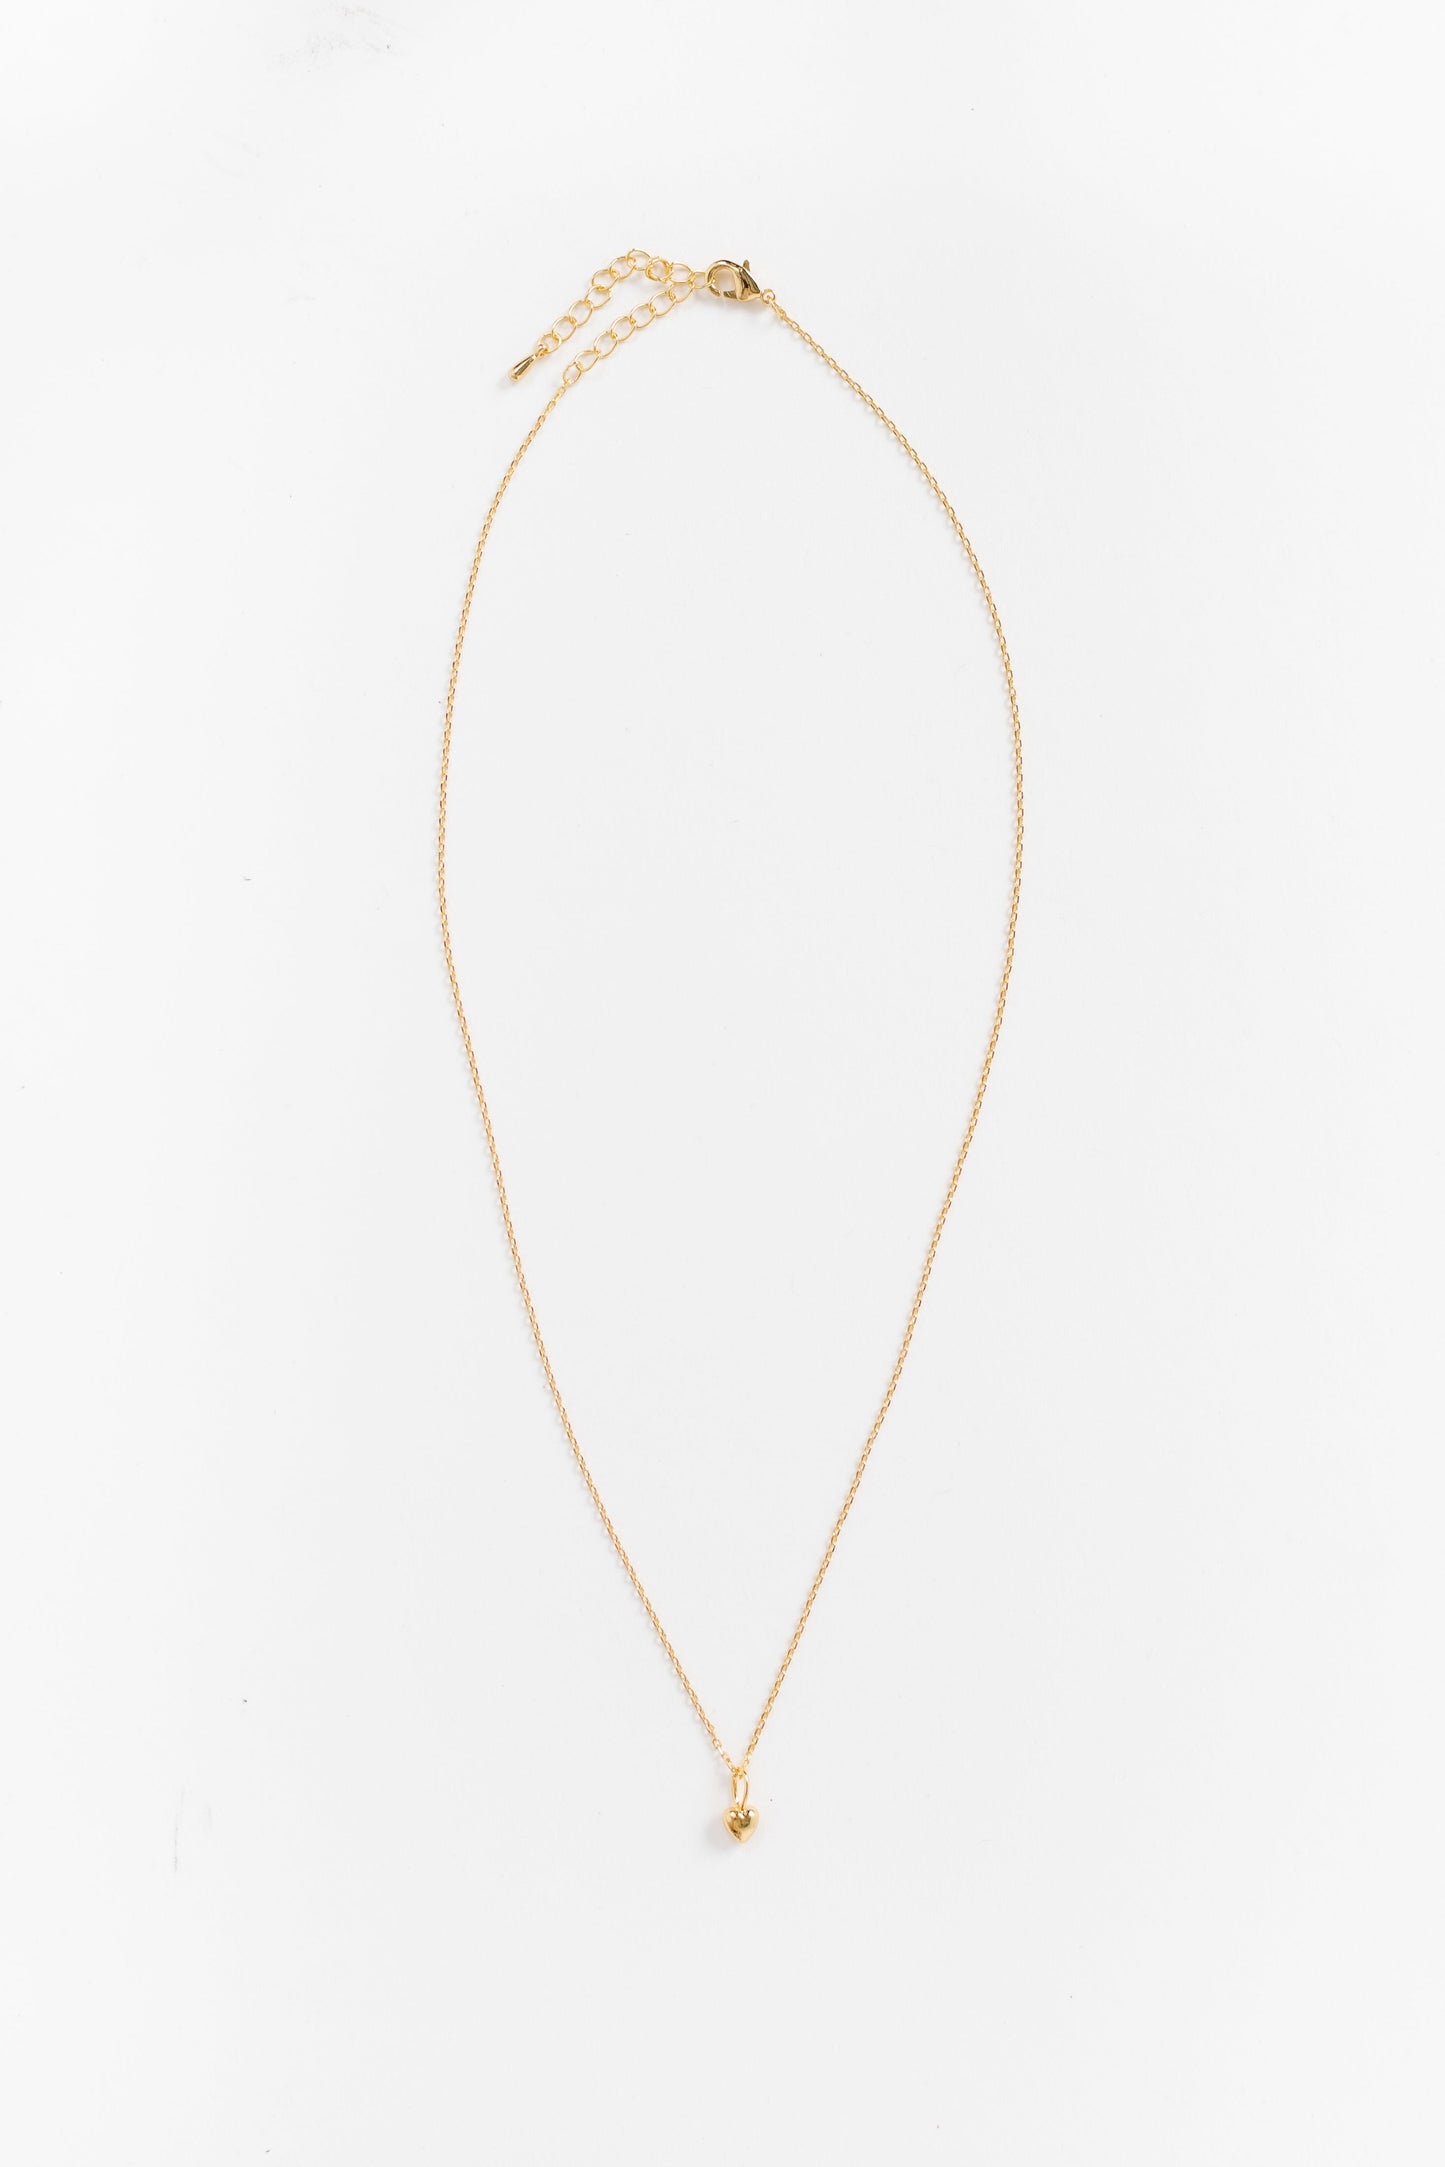 Dainty Heart Necklace WOMEN'S NECKLACE Cove 